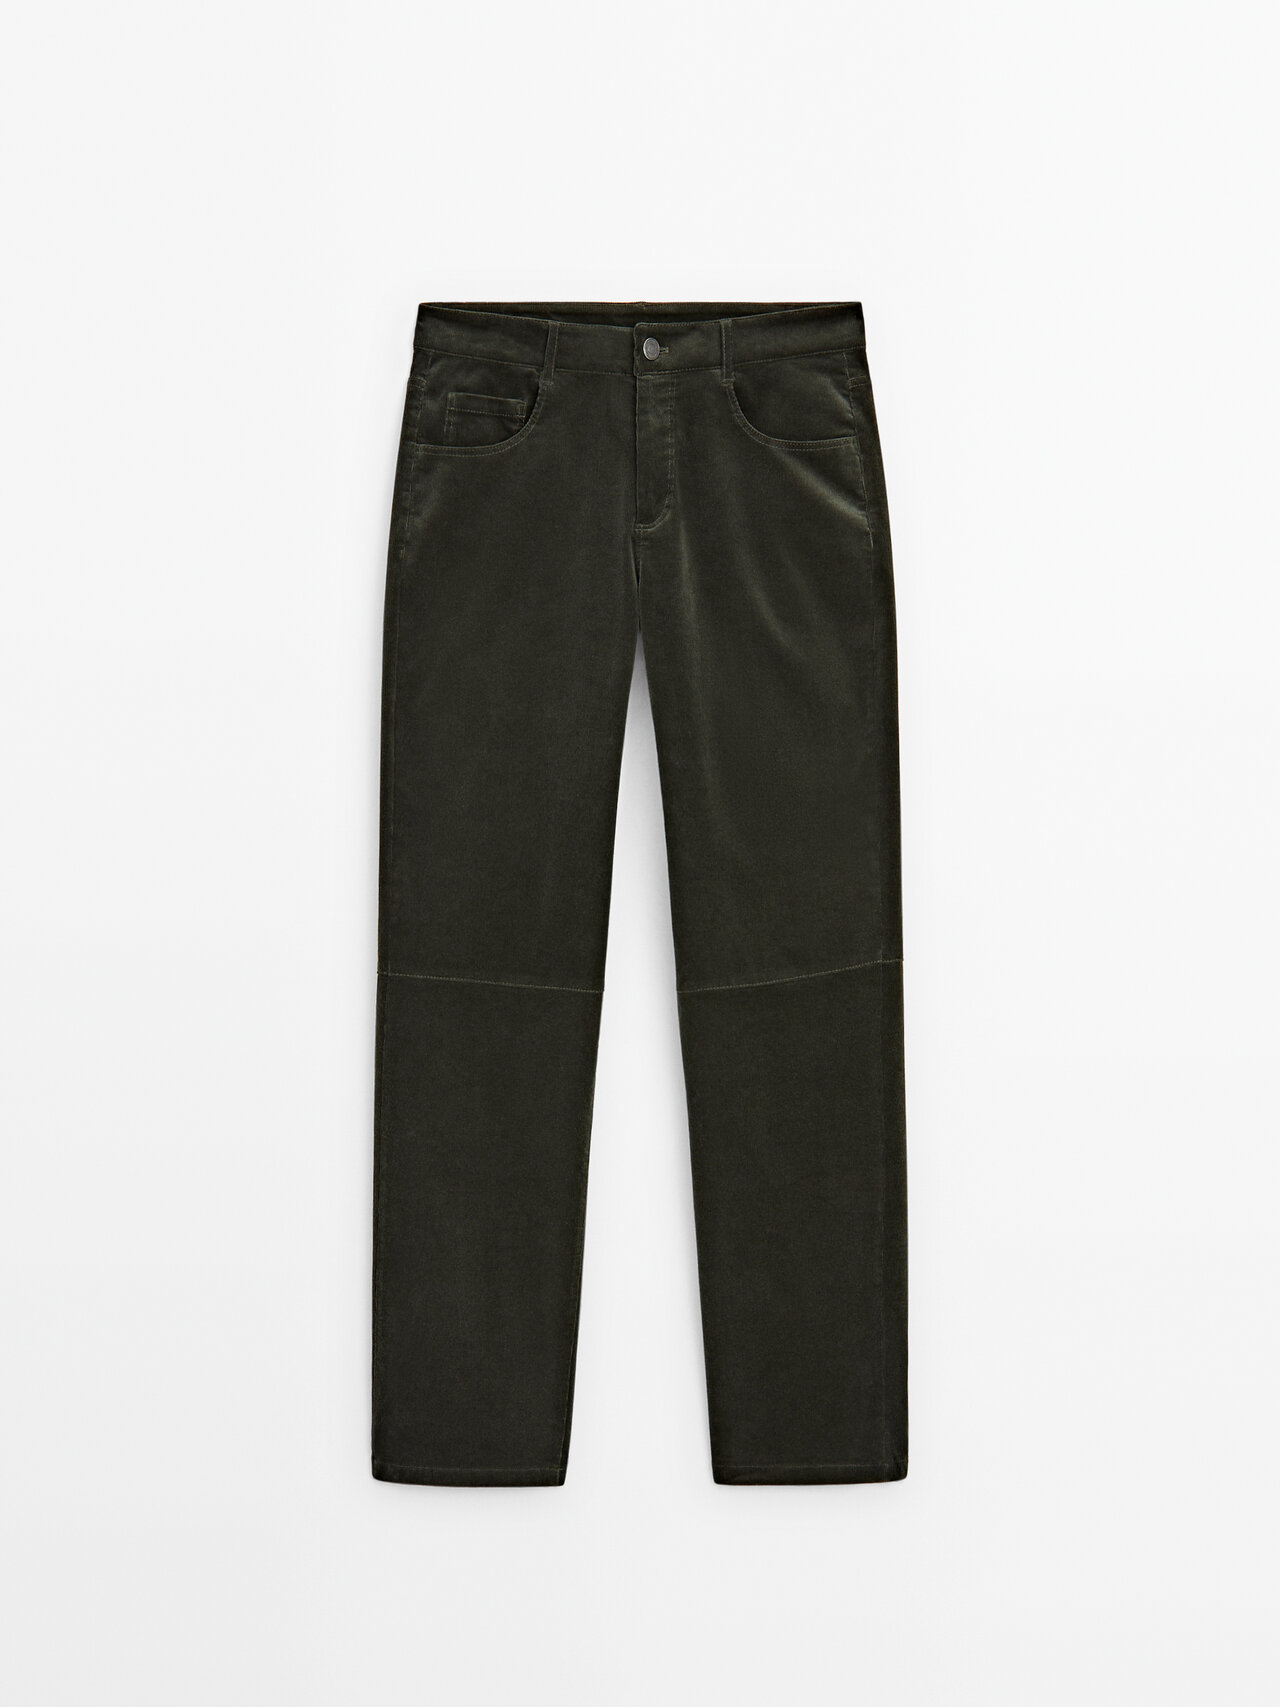 Massimo Dutti Slim Fit Micro Corduroy Trousers With Stitching Detail In Dark Green